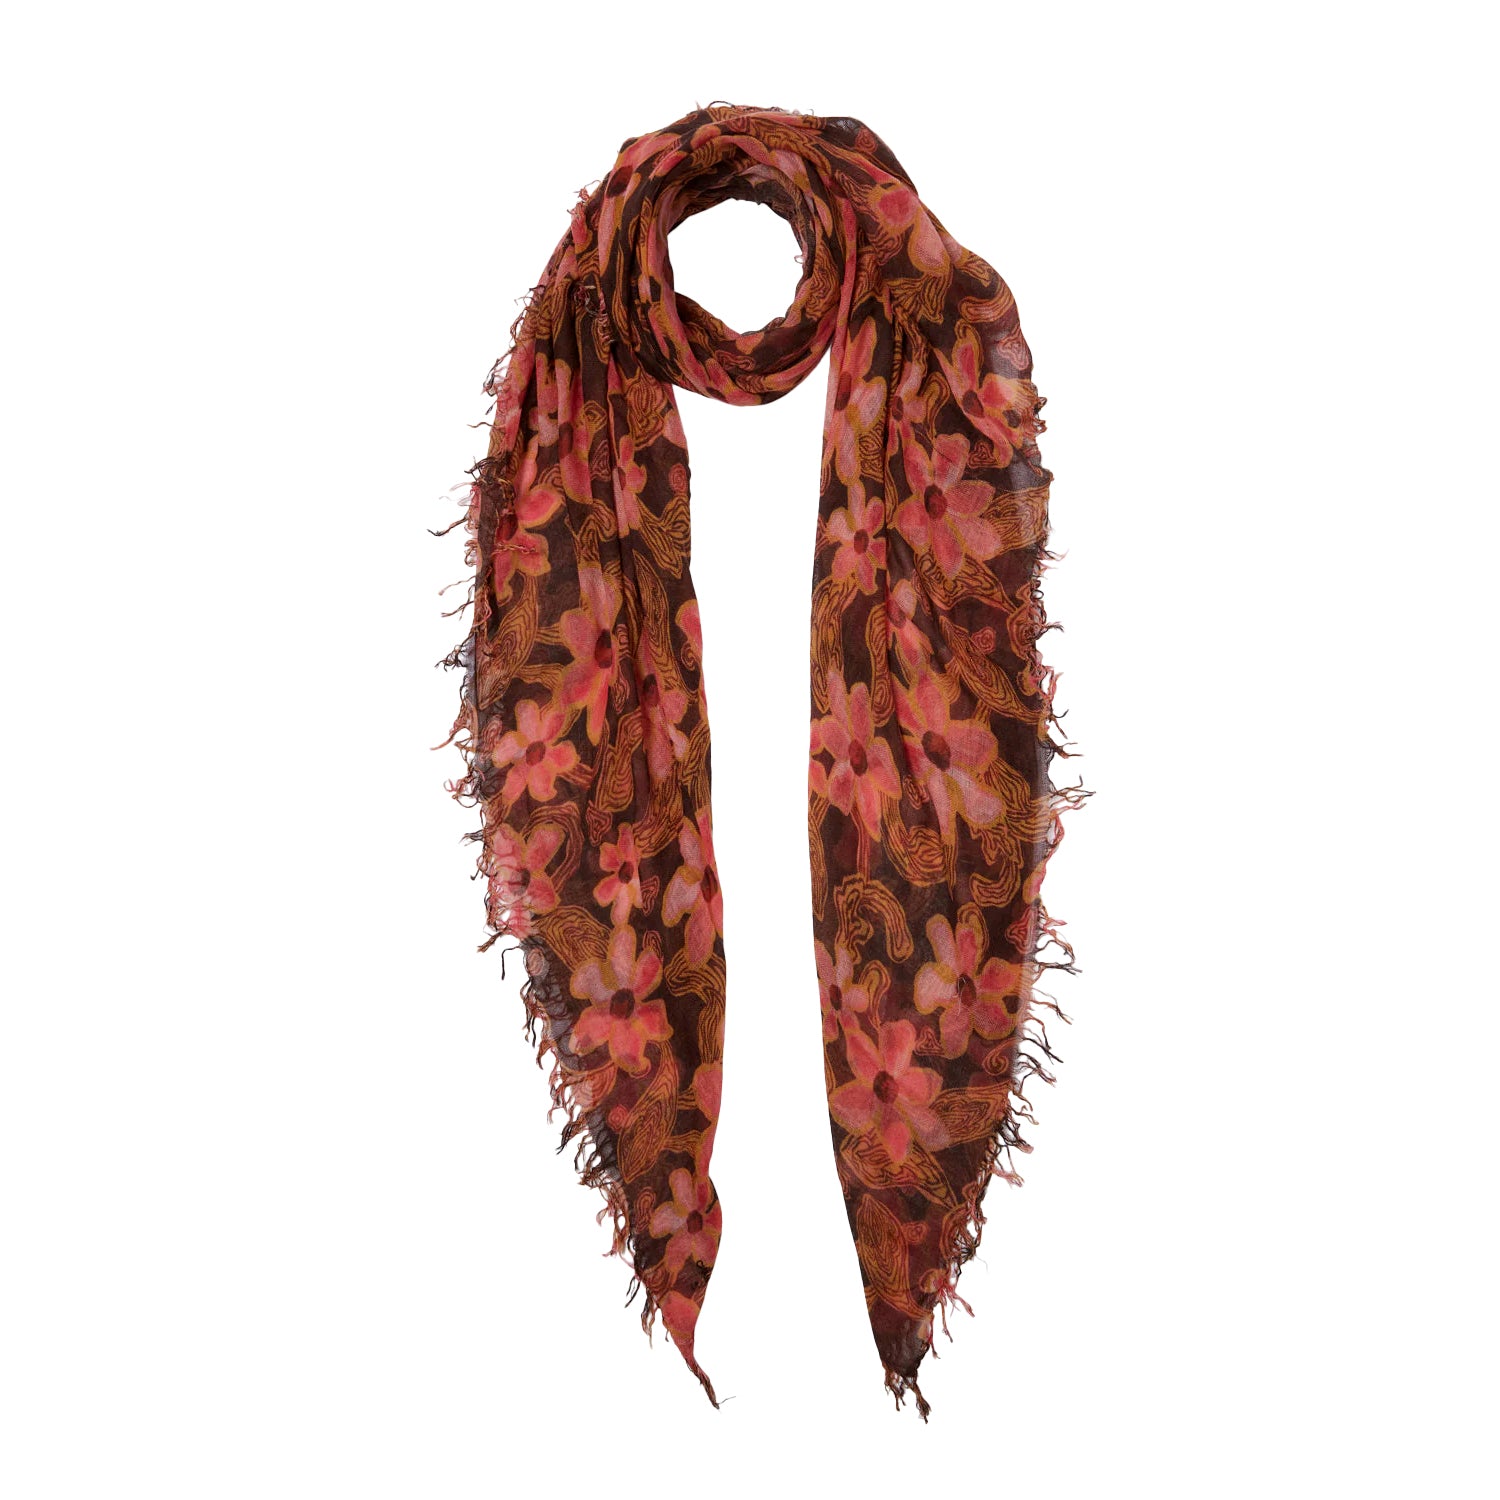 Silk/Cashmere Scarf - Fired Brick Meadow Floral